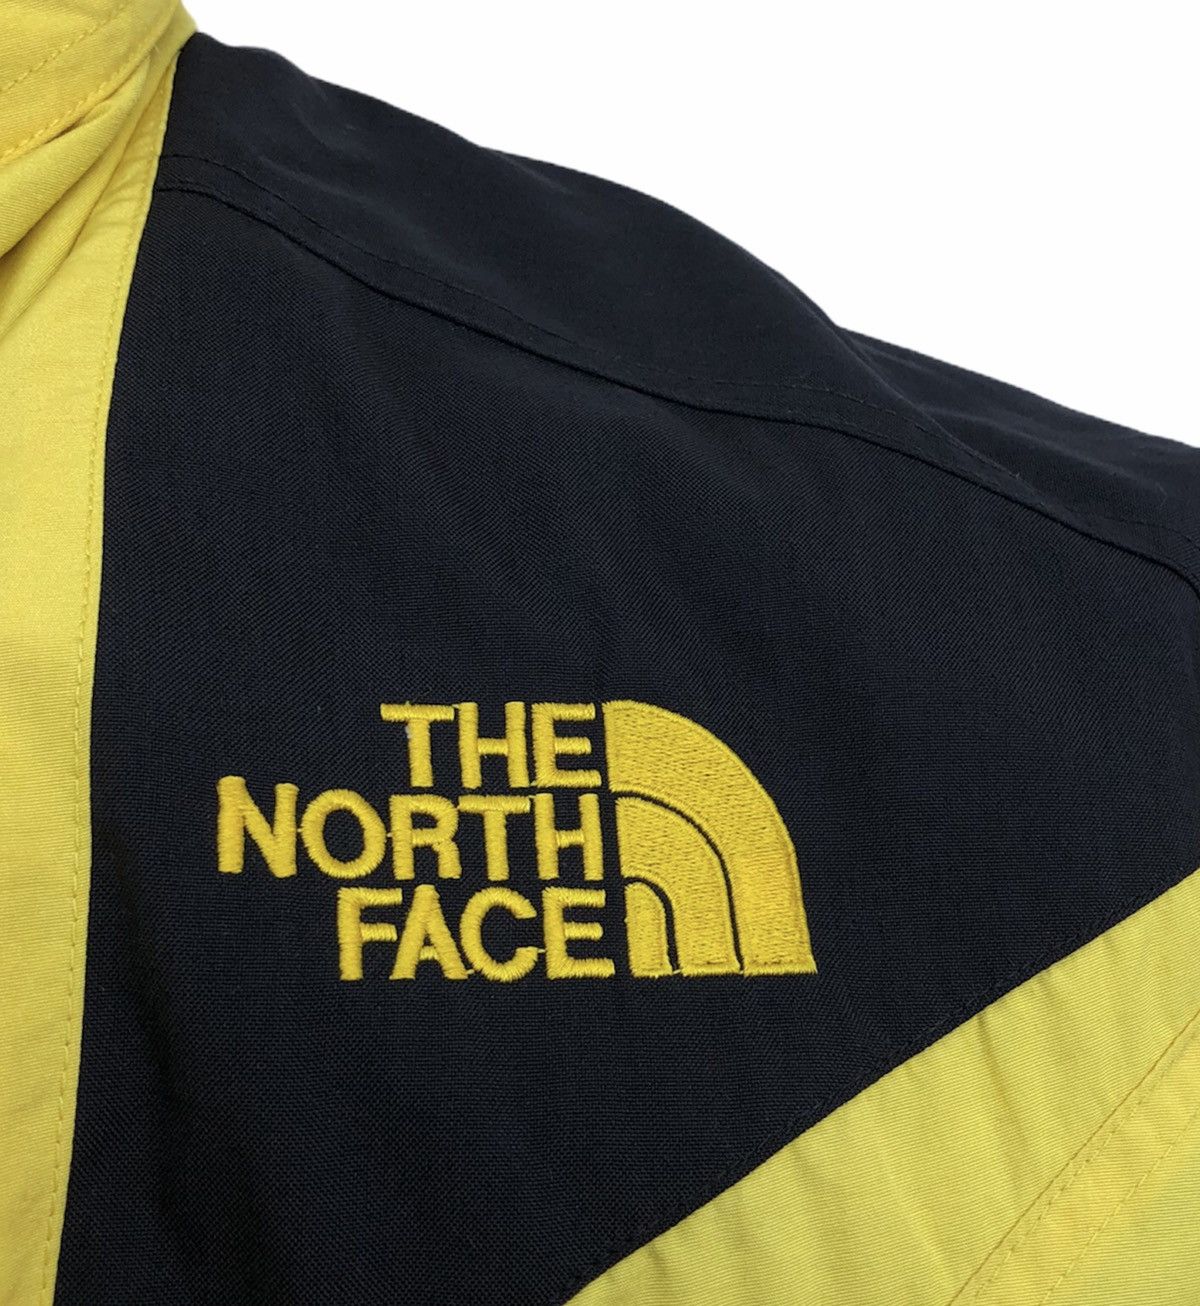 The North Face 🔥The North Face Zip Button Up Man Hooded Jacket Size US L / EU 52-54 / 3 - 8 Thumbnail